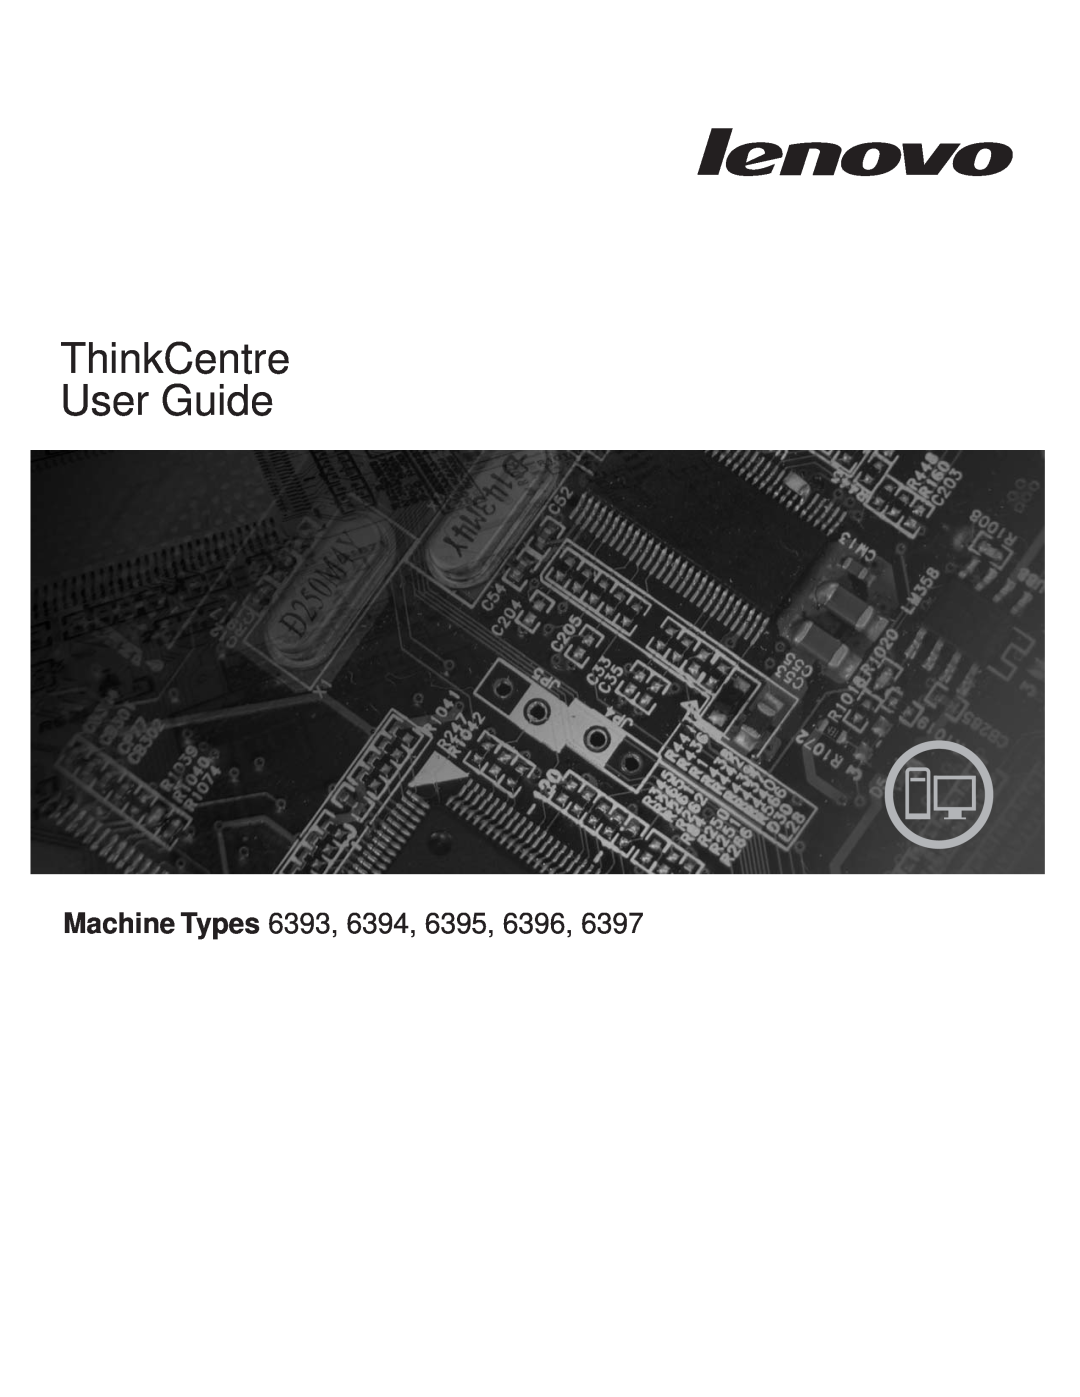 Lenovo 6394, 6395, 6397, 6396 manual ThinkCentre User Guide, Machine Types 6393 